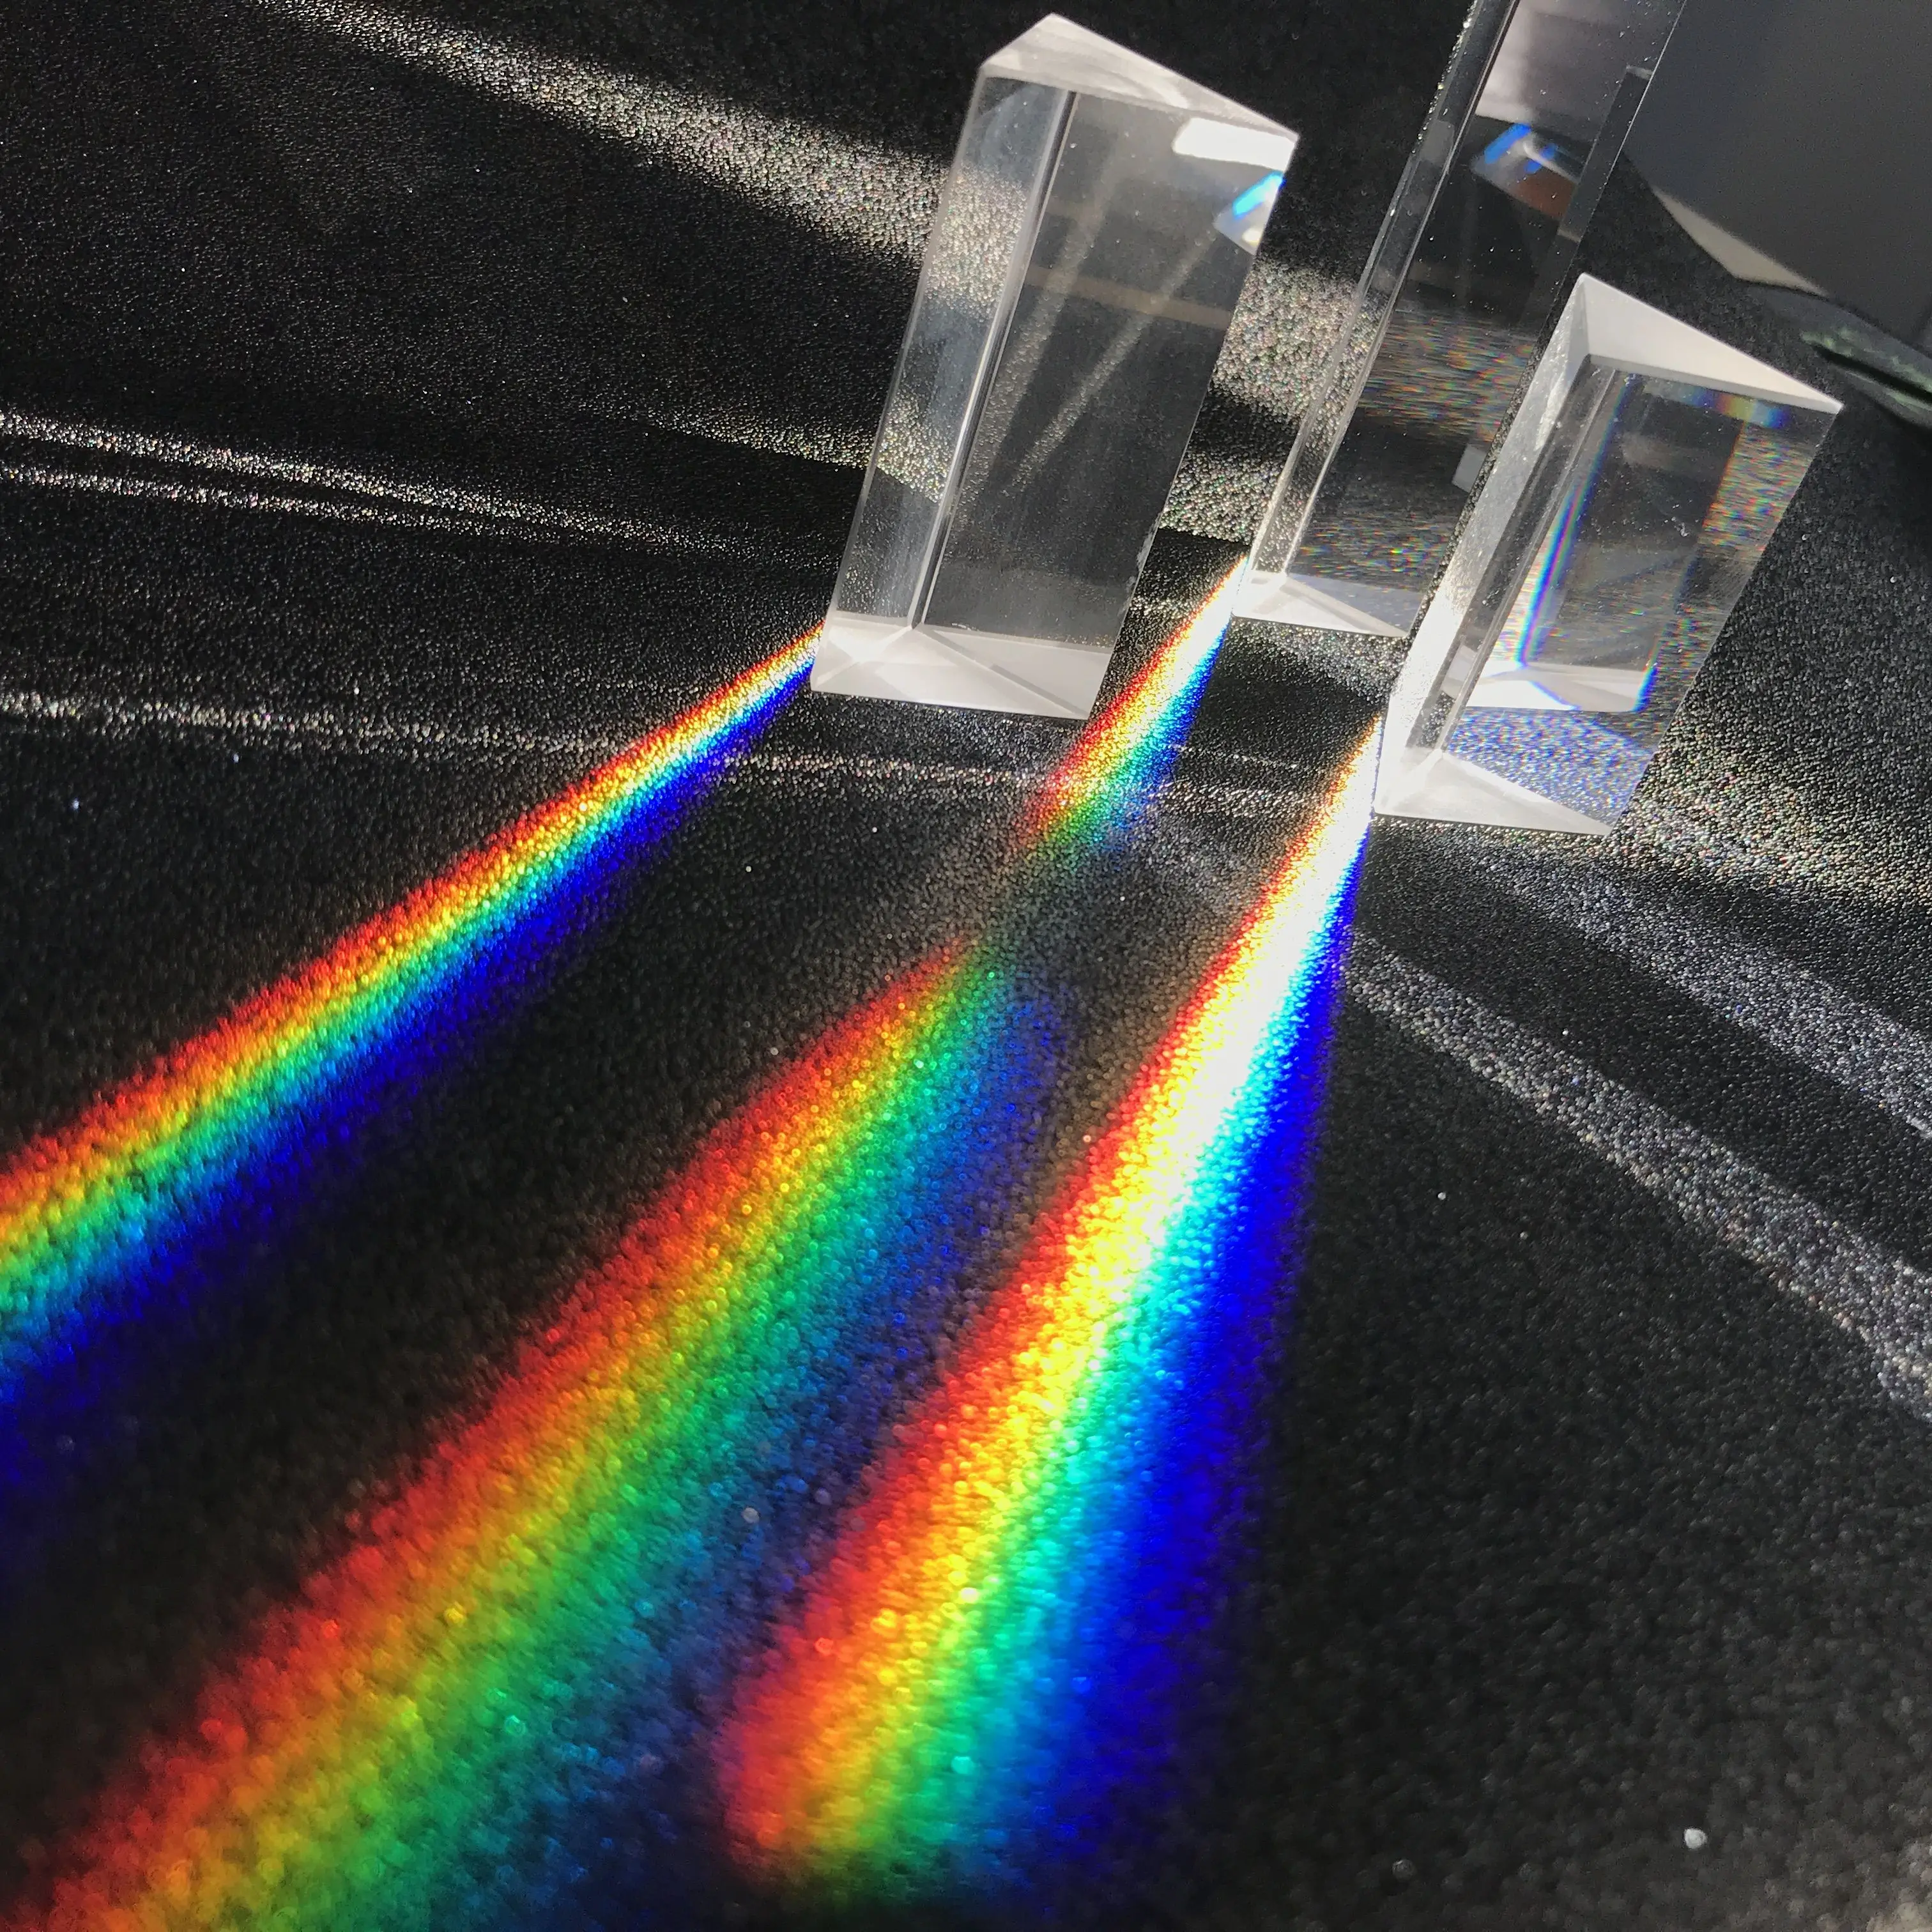 

30*30*60MM Triangular Prism To See Rainbow Size Photo Photography Seven-color Sunlight Student Optical Science Experiment